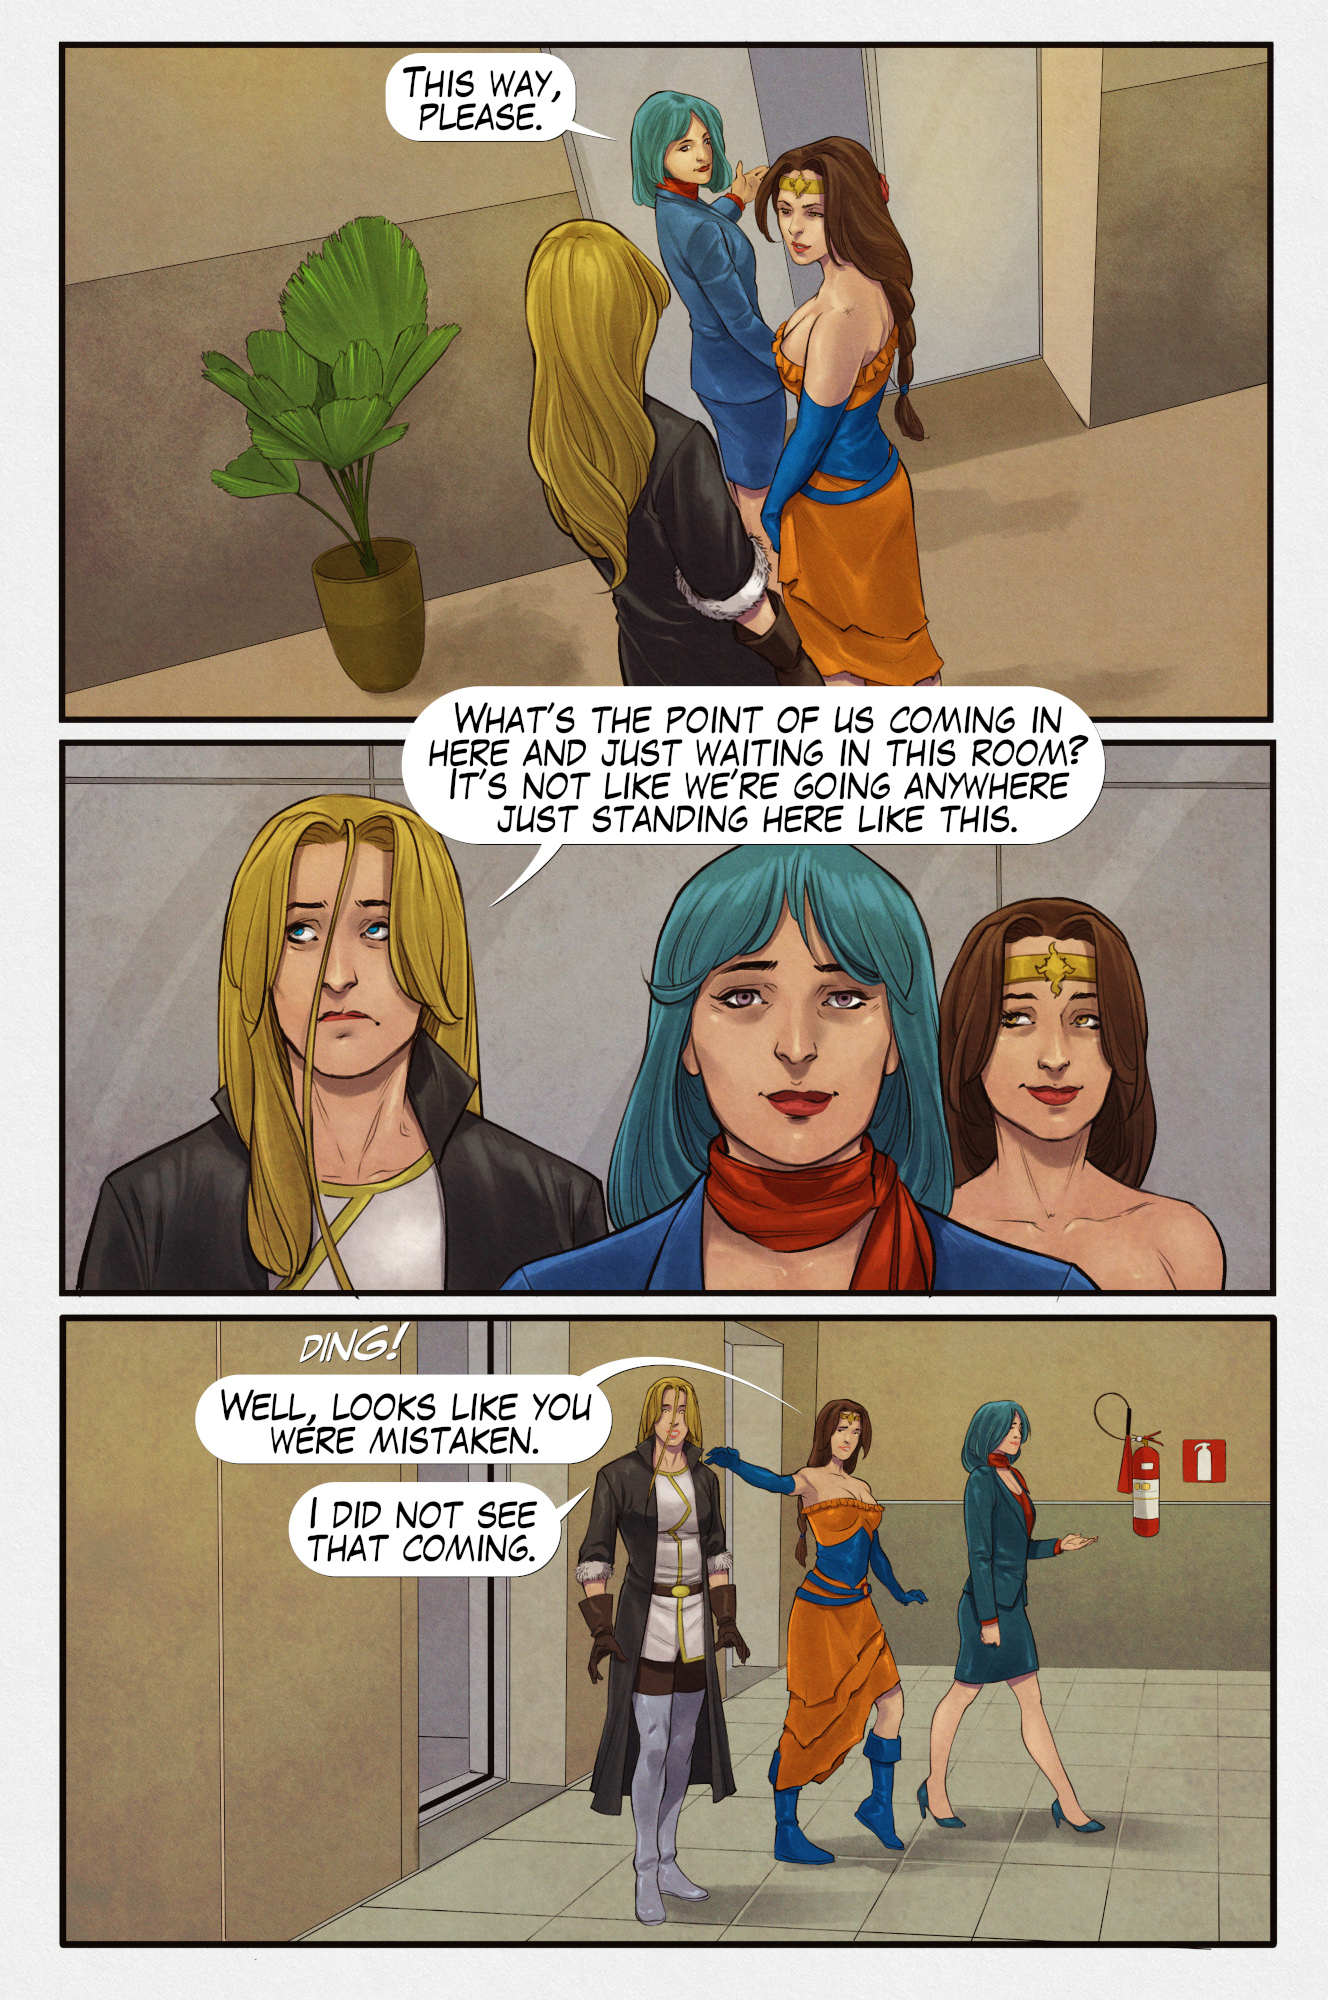 Girls Night Out - Prologue Page 13: An Uplifting Experience